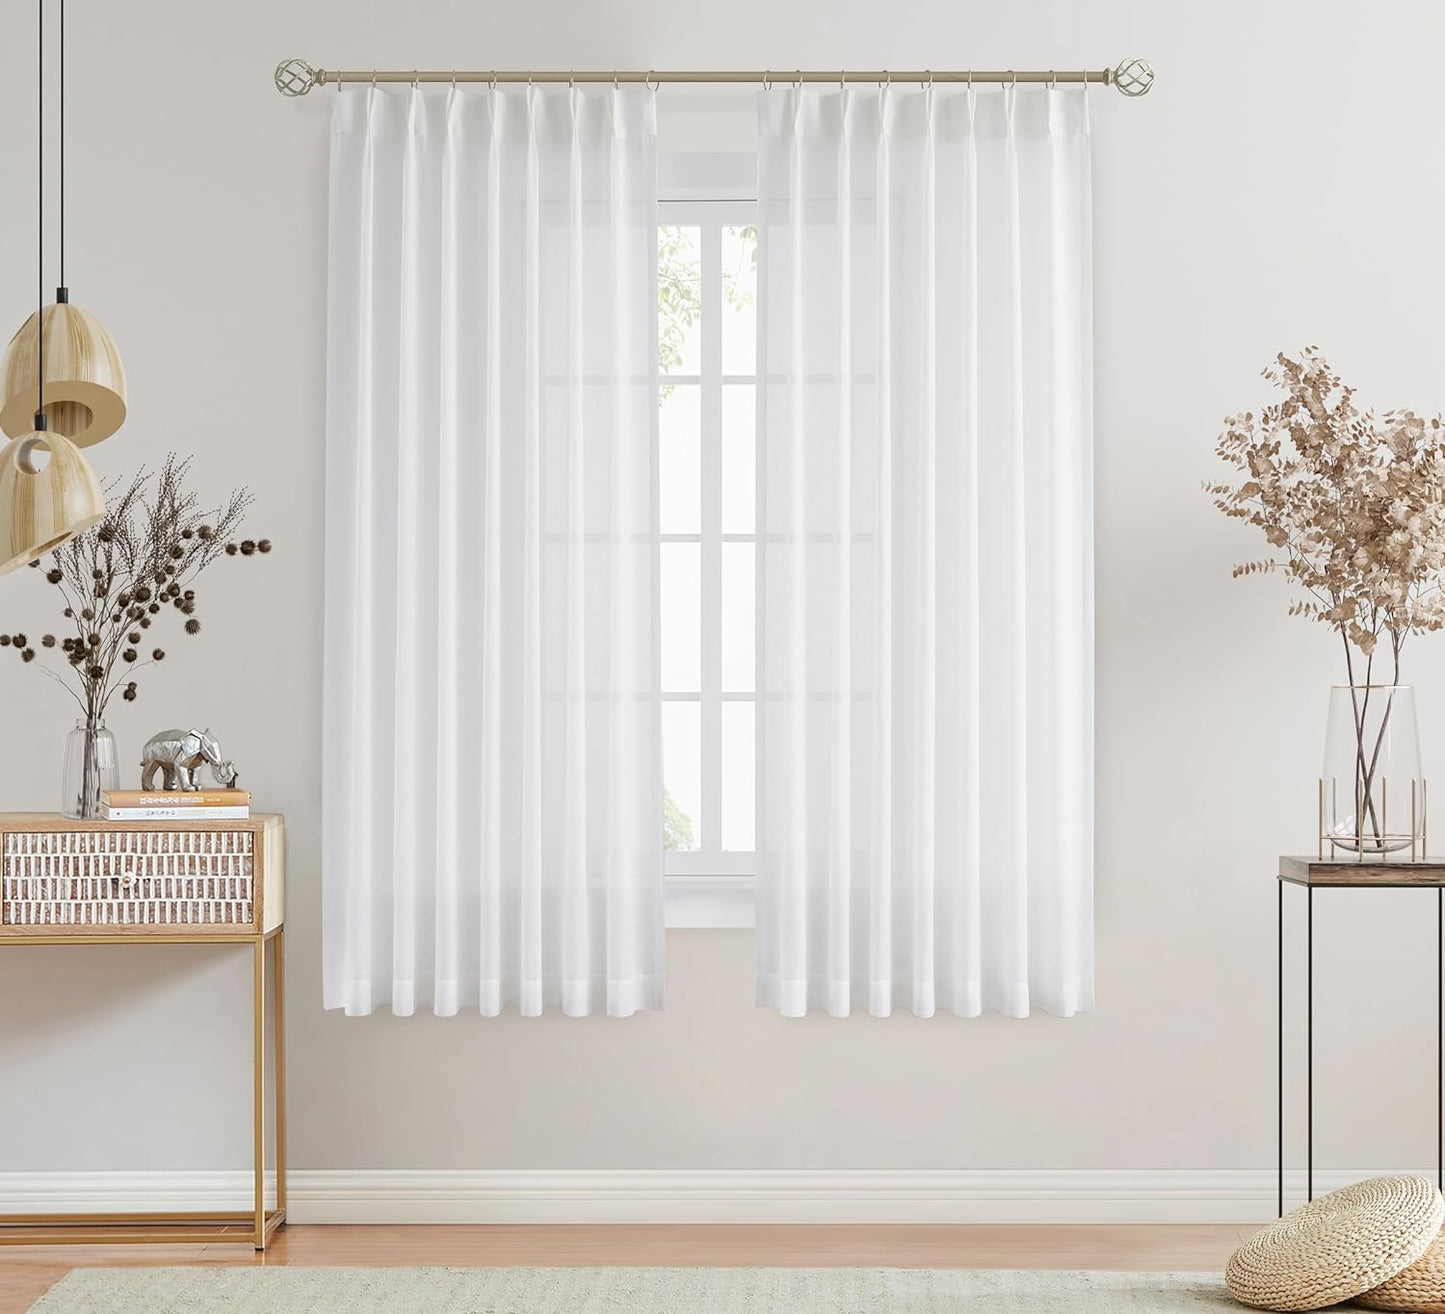 Central Park White Pinch Pleat Sheer Curtain 108 Inches Extra Long Textured Farmhouse Window Treatment Drapery Sets for Living Room Bedroom, 40"X108"X2  Central Park White/Pinch 40"X72"X2 